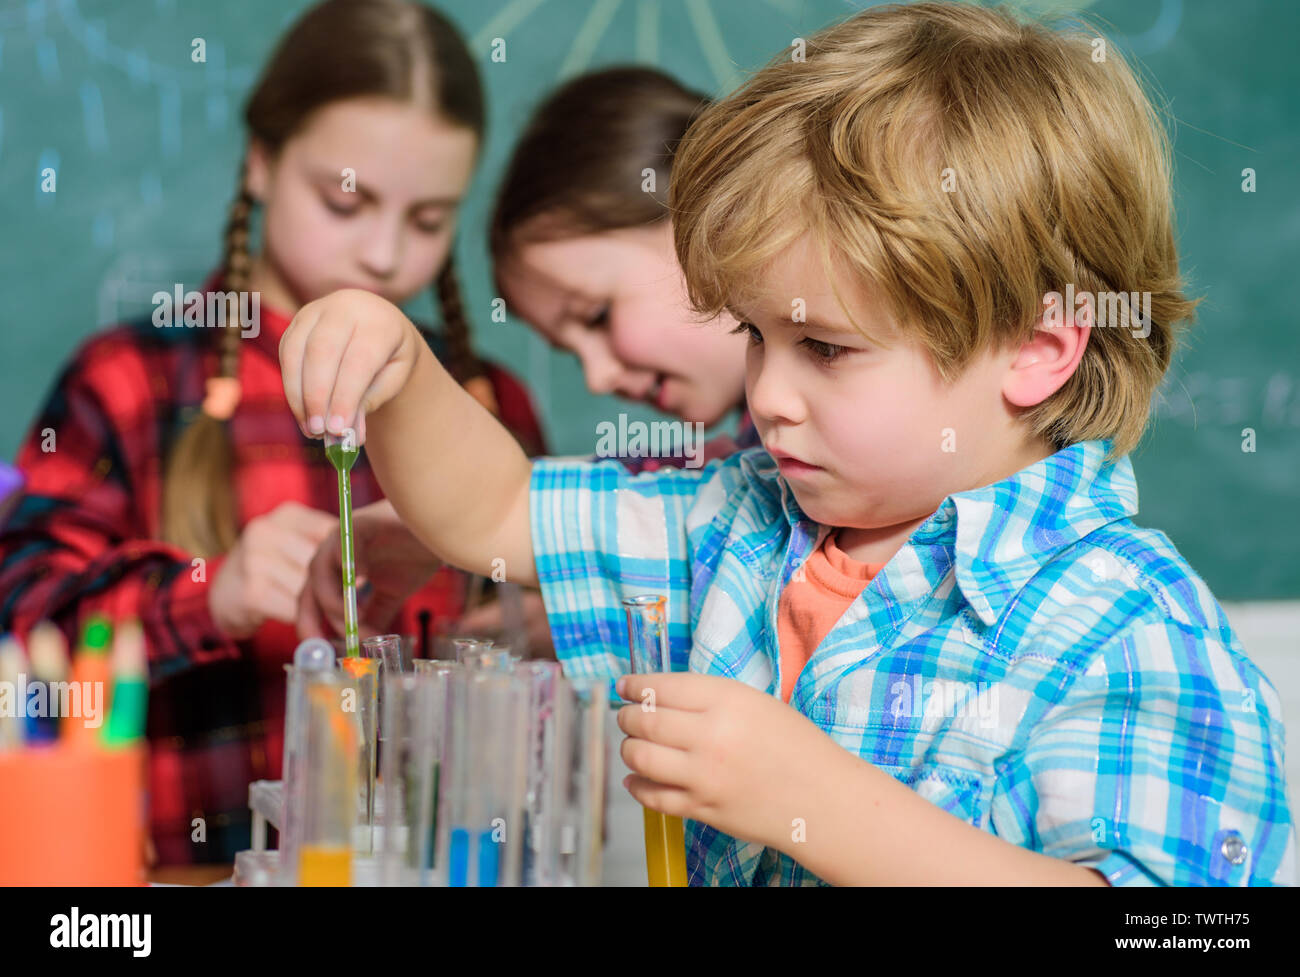 Laboratory Research - Scientific project For Chemical test. Science and education. chemistry lab. happy children. back to school. School chemistry laboratory. Working together to prepare for finals. Stock Photo